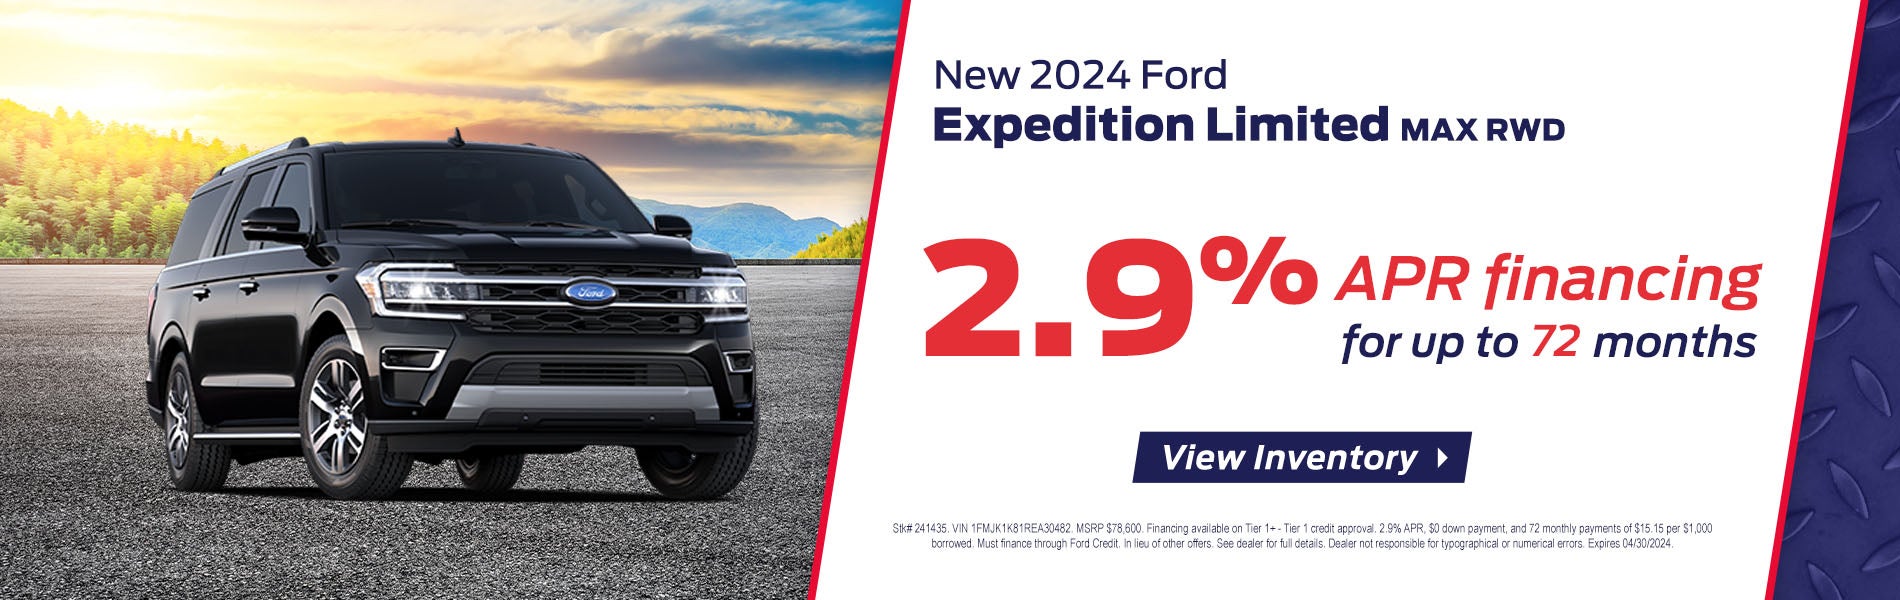 2.9% apr financing on a 2024 ford expedition